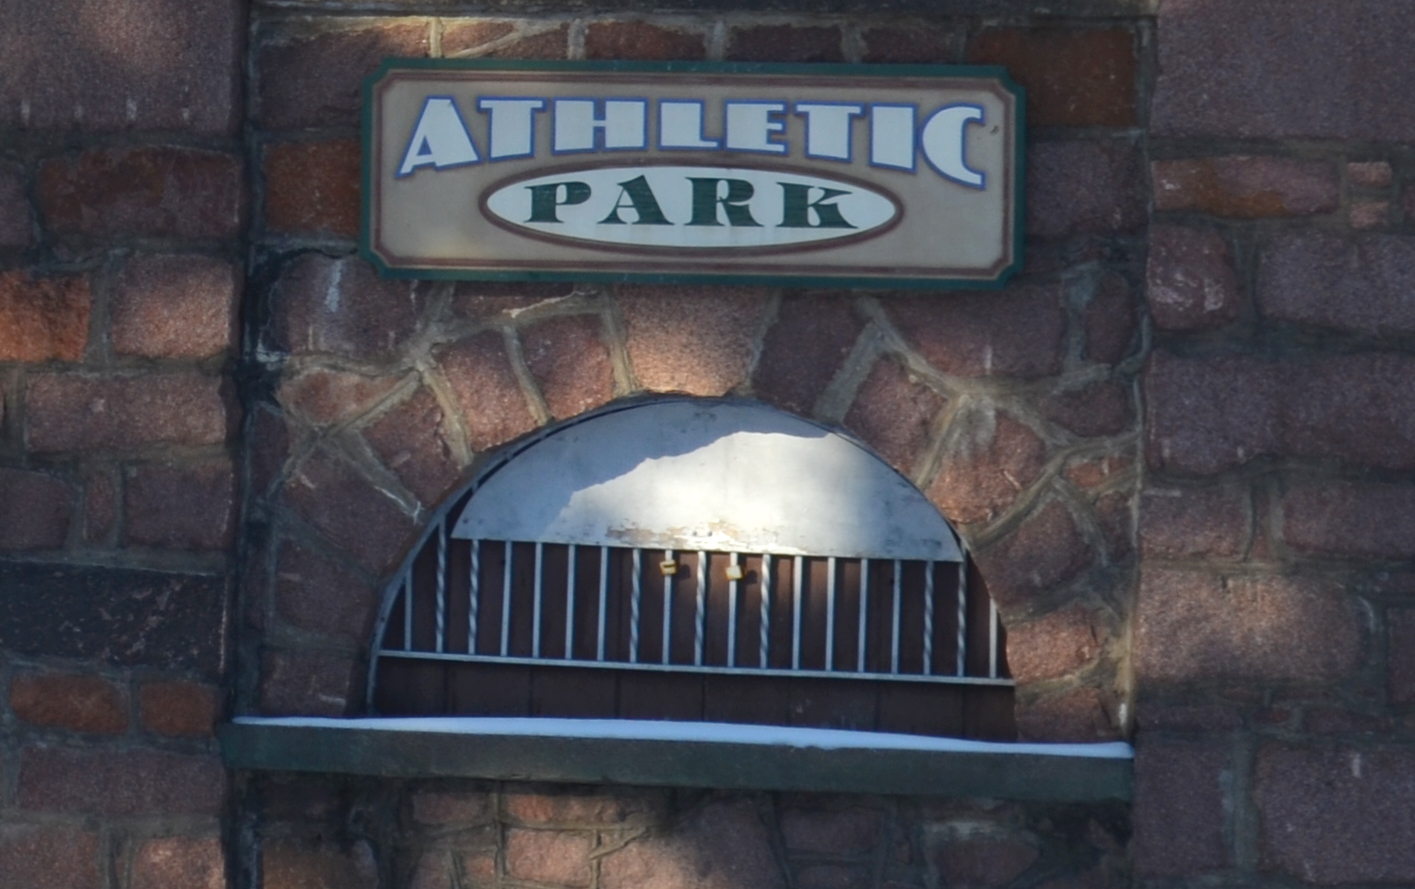 City awarded $45,000 grant for Athletic Park lighting upgrade